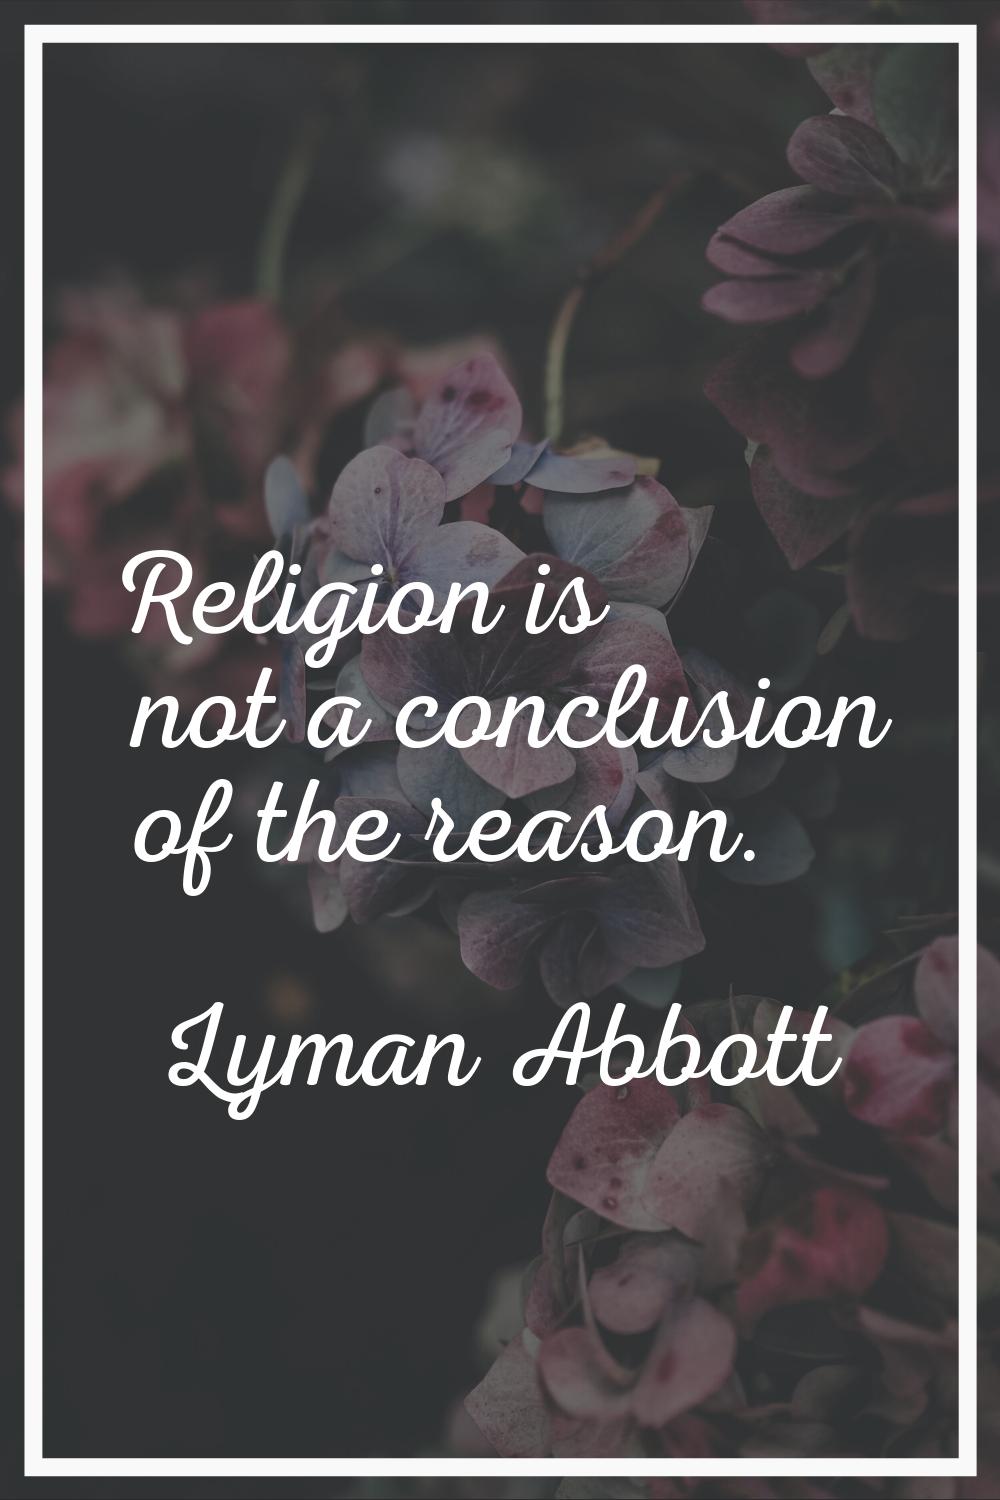 Religion is not a conclusion of the reason.